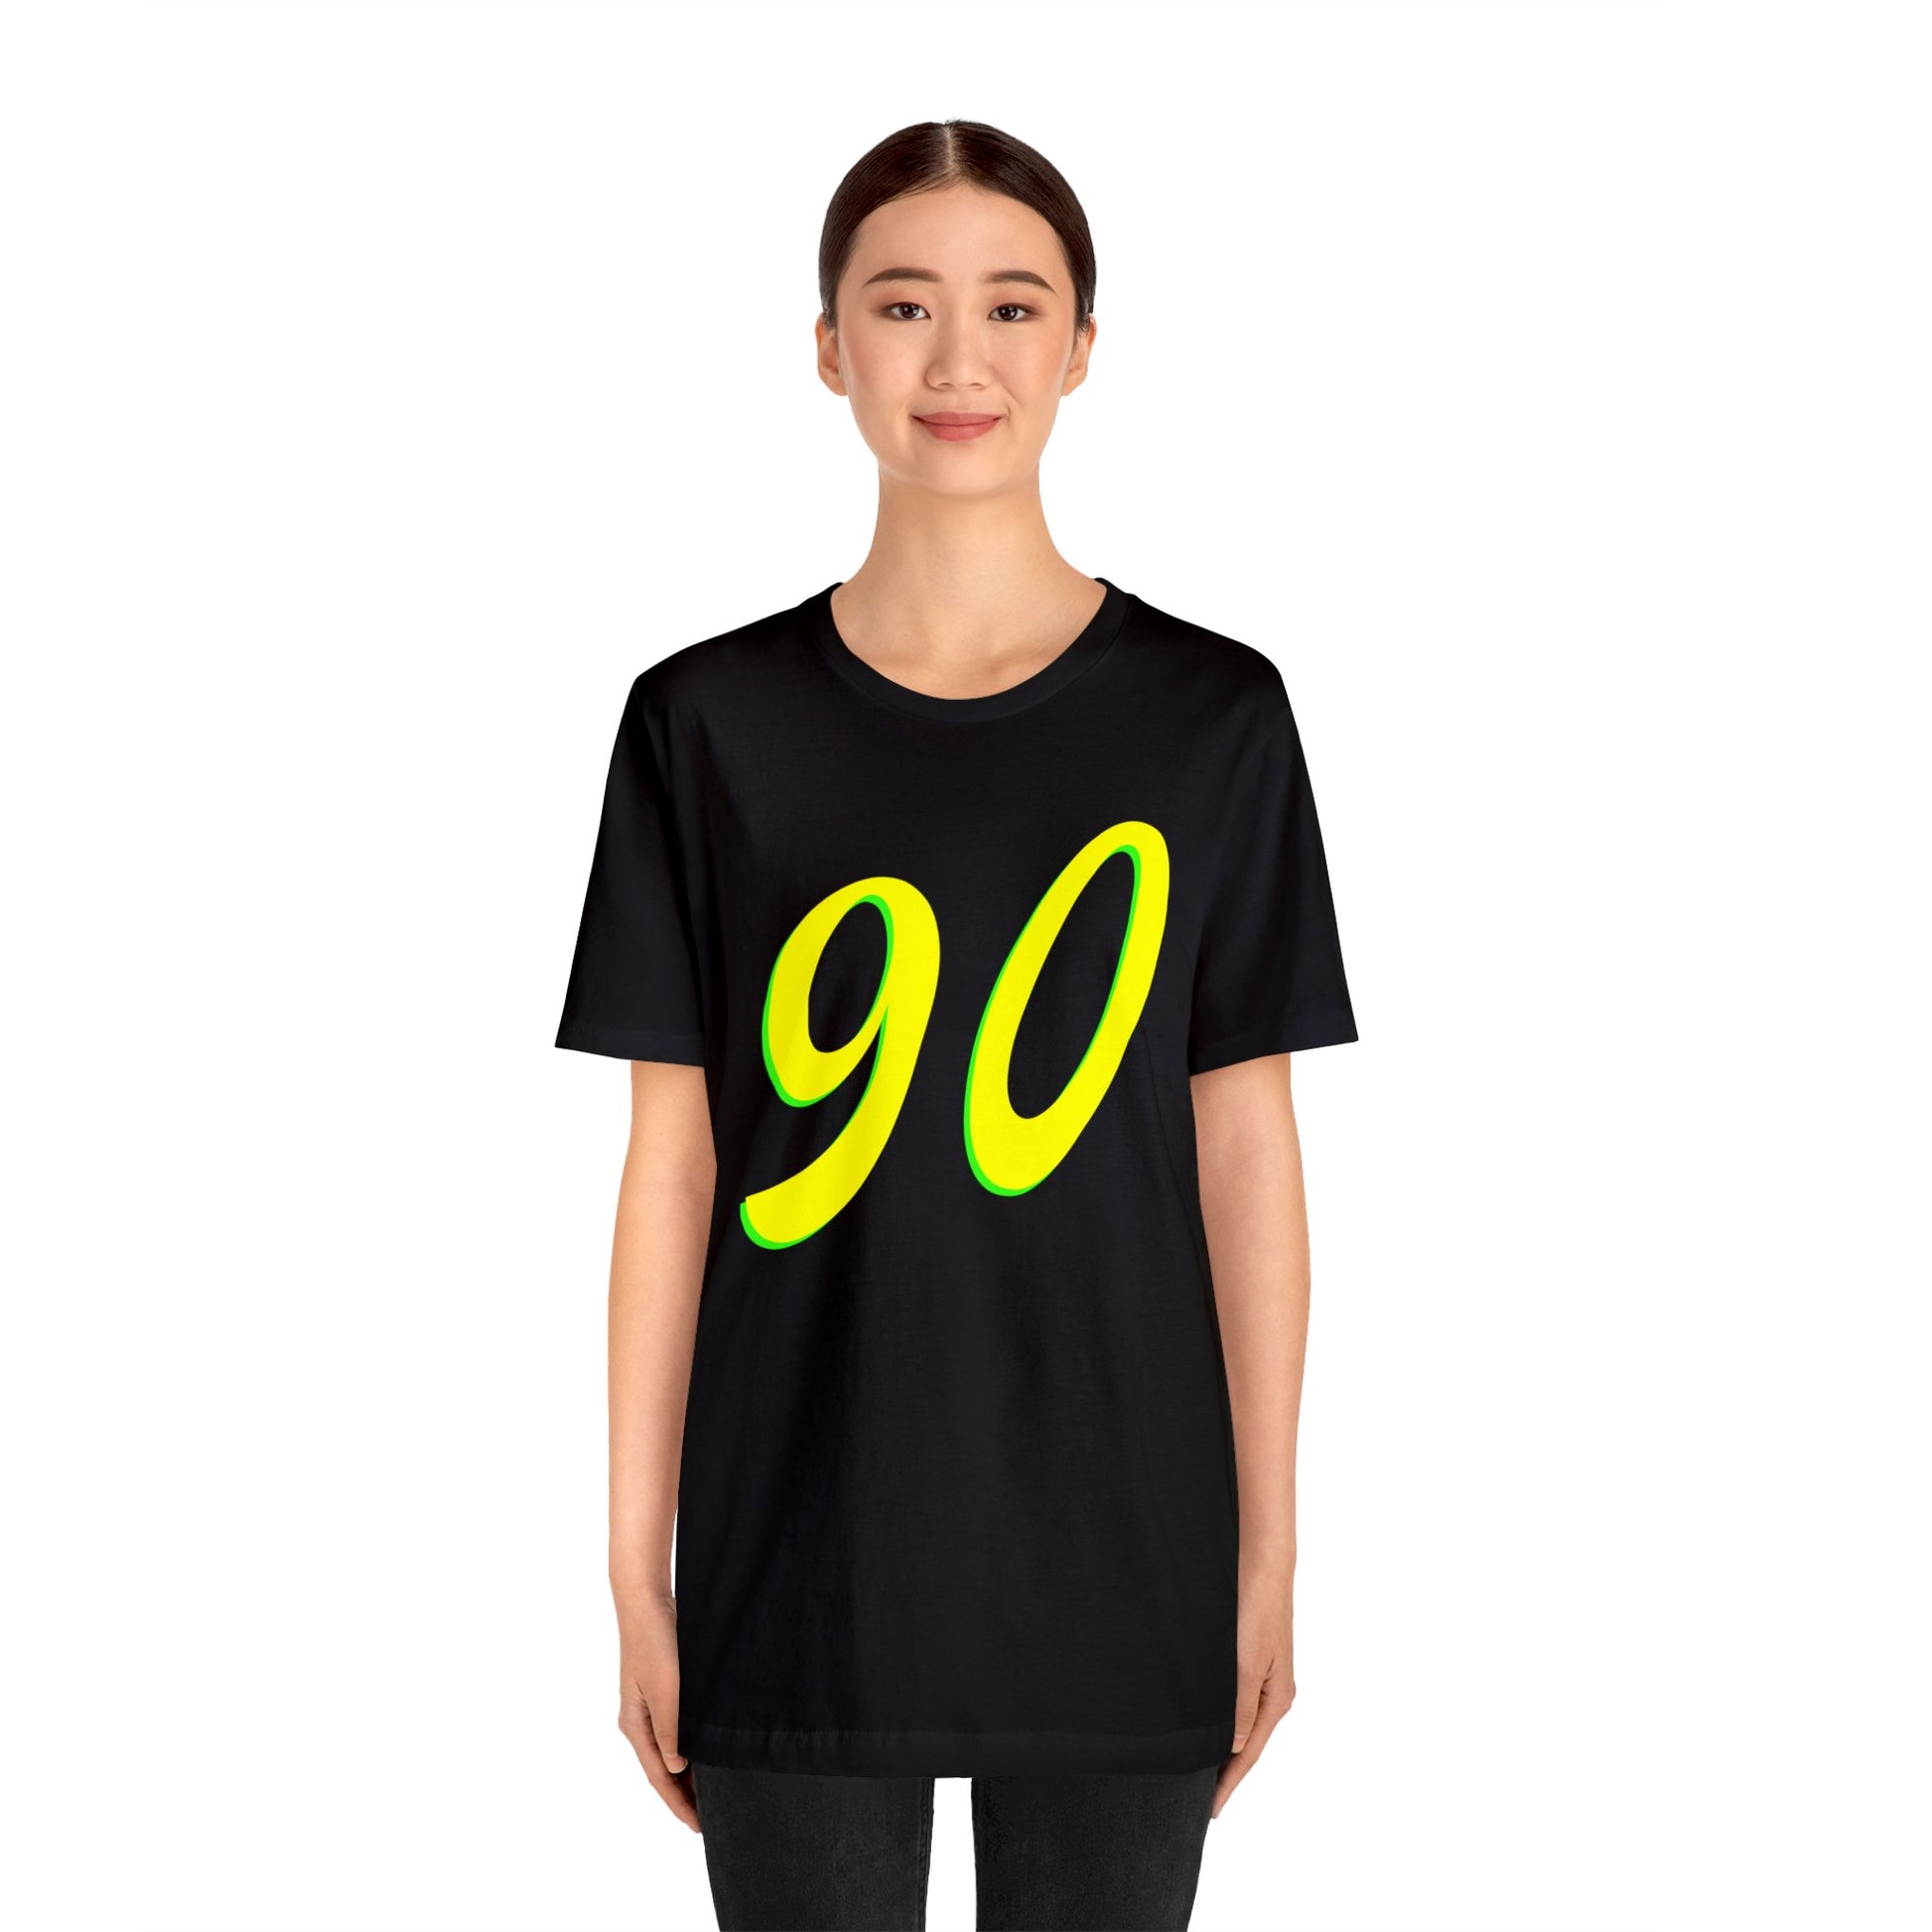 Number 90 Design - Soft Cotton Tee for birthdays and celebrations, Gift for friends and family, Multiple Options by clothezy.com in Black Size Medium - Buy Now